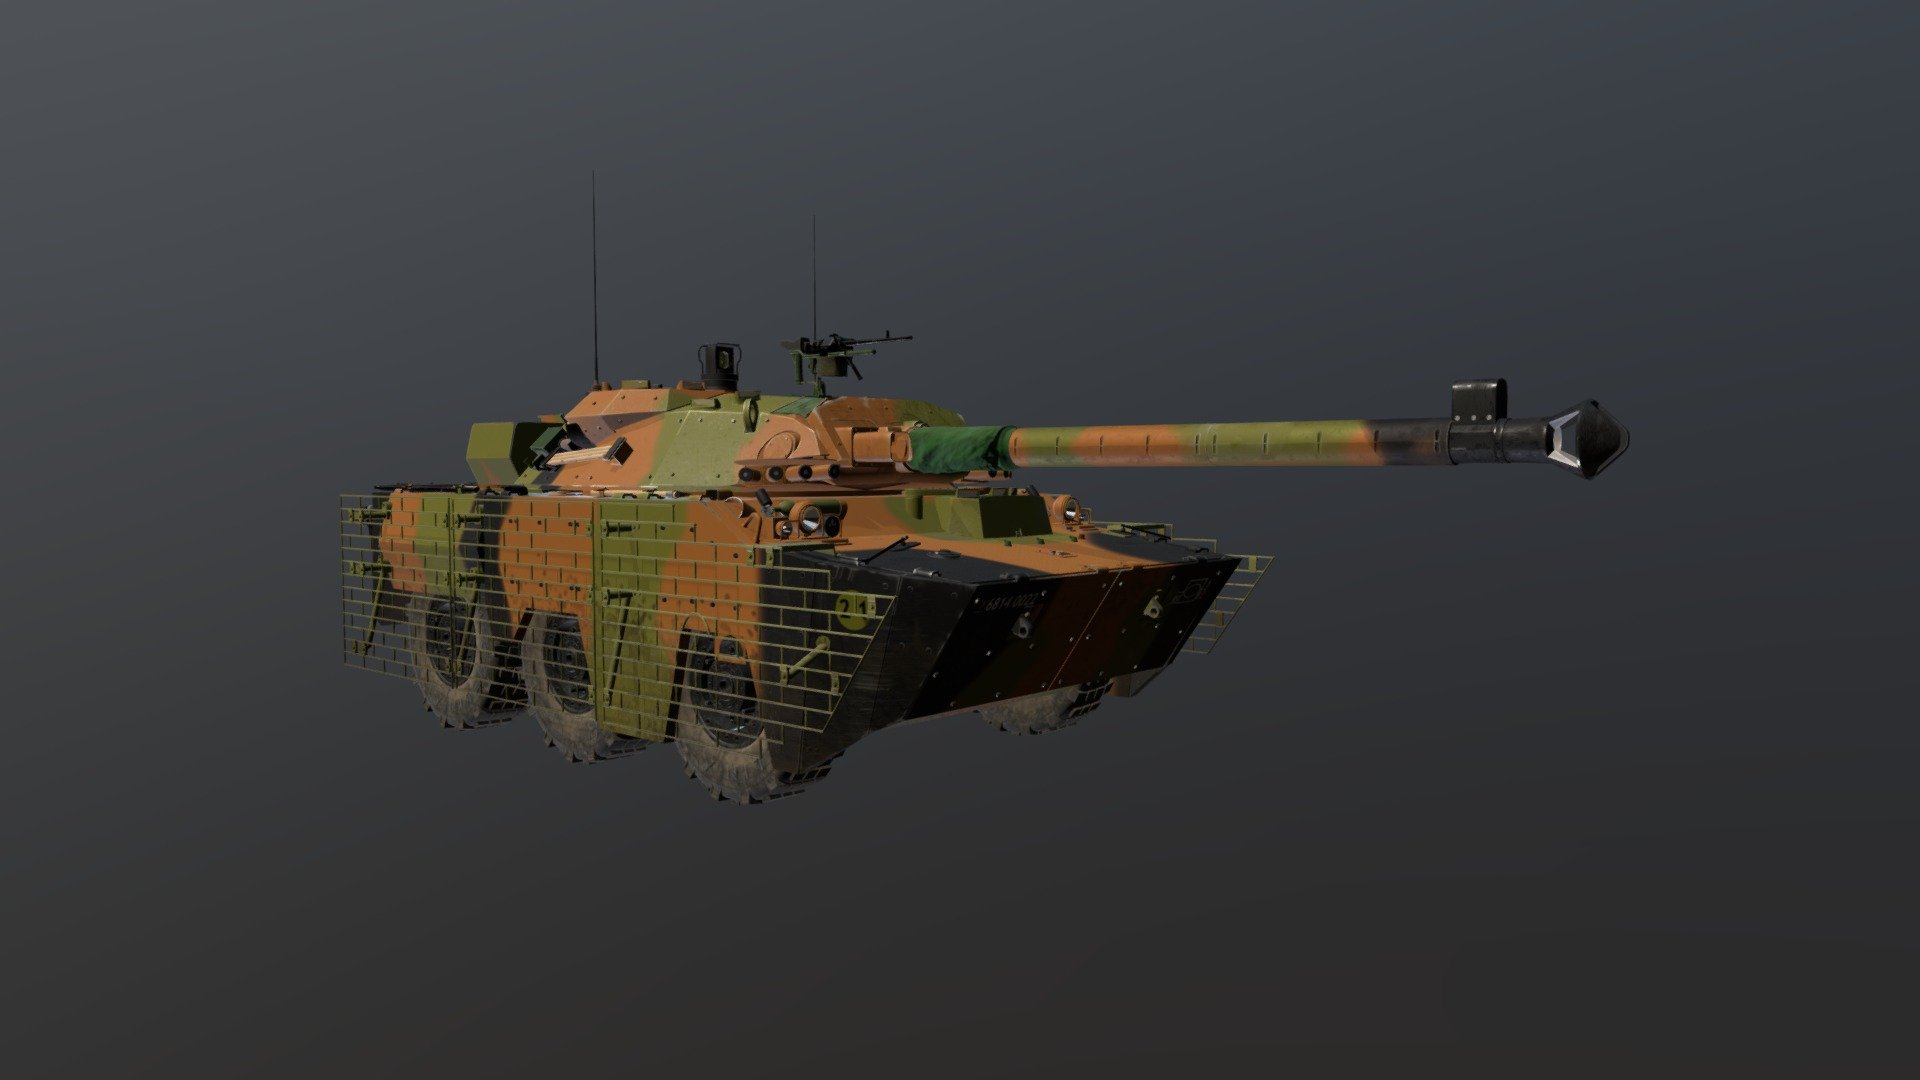 Tank France AMX 10 RCR
High Quality PBR Mine boat  The provided model has been created inside of Autodesk Max (version 2018) , textured in 3D Coat
PRODUCT DETAILS:
* Real size model  * Unwrapped UVs with YES overlapping  * High Quality Textures  * Scene files included
INCLUDED MATERIAL:  The model has 4 material.  * .fbx file format  * .obj file format  * .3ds file format 

* High Quality PBR Textures for Vray (.zip)  * High Quality PBR Textures for Unity (.zip)  * High Quality PBR Textures for Unreal (.zip)

TEXTURES WITH METAL / ROUGHNESS WORKFLOW
Vray
Unreal
Unity
* High Quality textures   * Base Color  * Roughness  * Metallic  * Normal 
4 sets of PBR Textures 

1  Corpus         (4096 X 4096) 
2  Turett            (2048 X 2048) 
3  Gun                (2048 X 2048) 
4  Gun Mask    (2048 X 2048)
5  Whell             (1024*1024) - AMX-10 RCR - 3D model by AndrianoVinneti 3d model